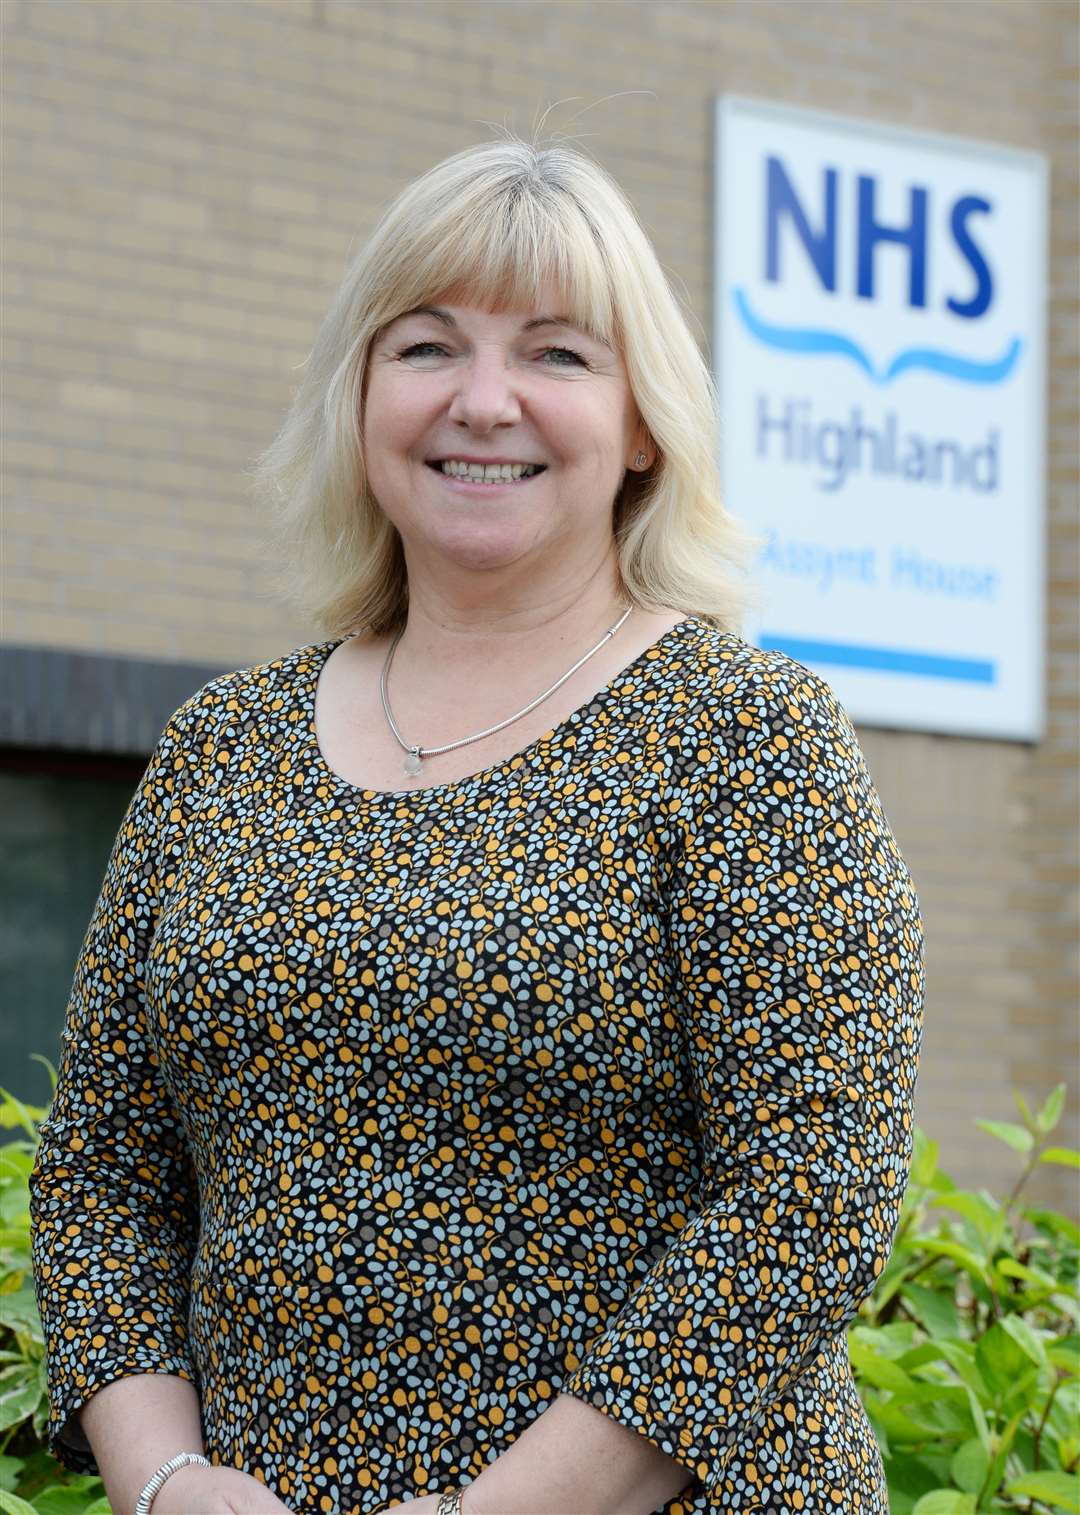 Pam Dudek, NHS Highland chief executive, will be at the meeting